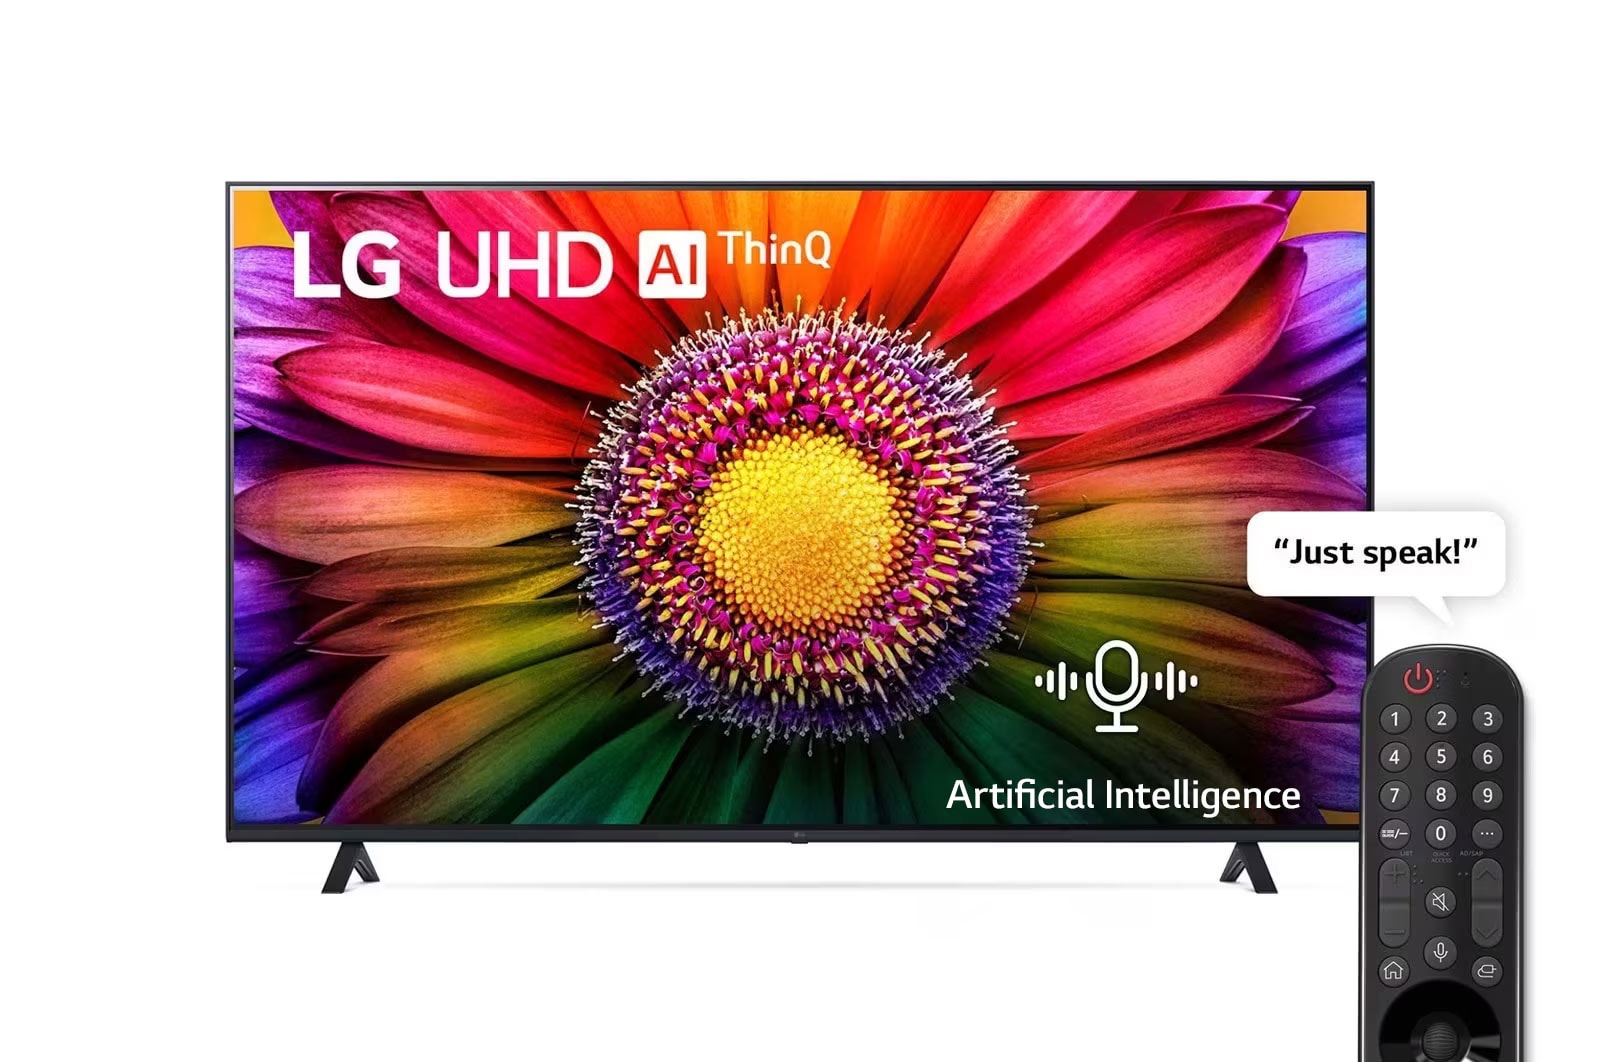 Immerse yourself in stunning 4K Ultra HD visuals on the expansive